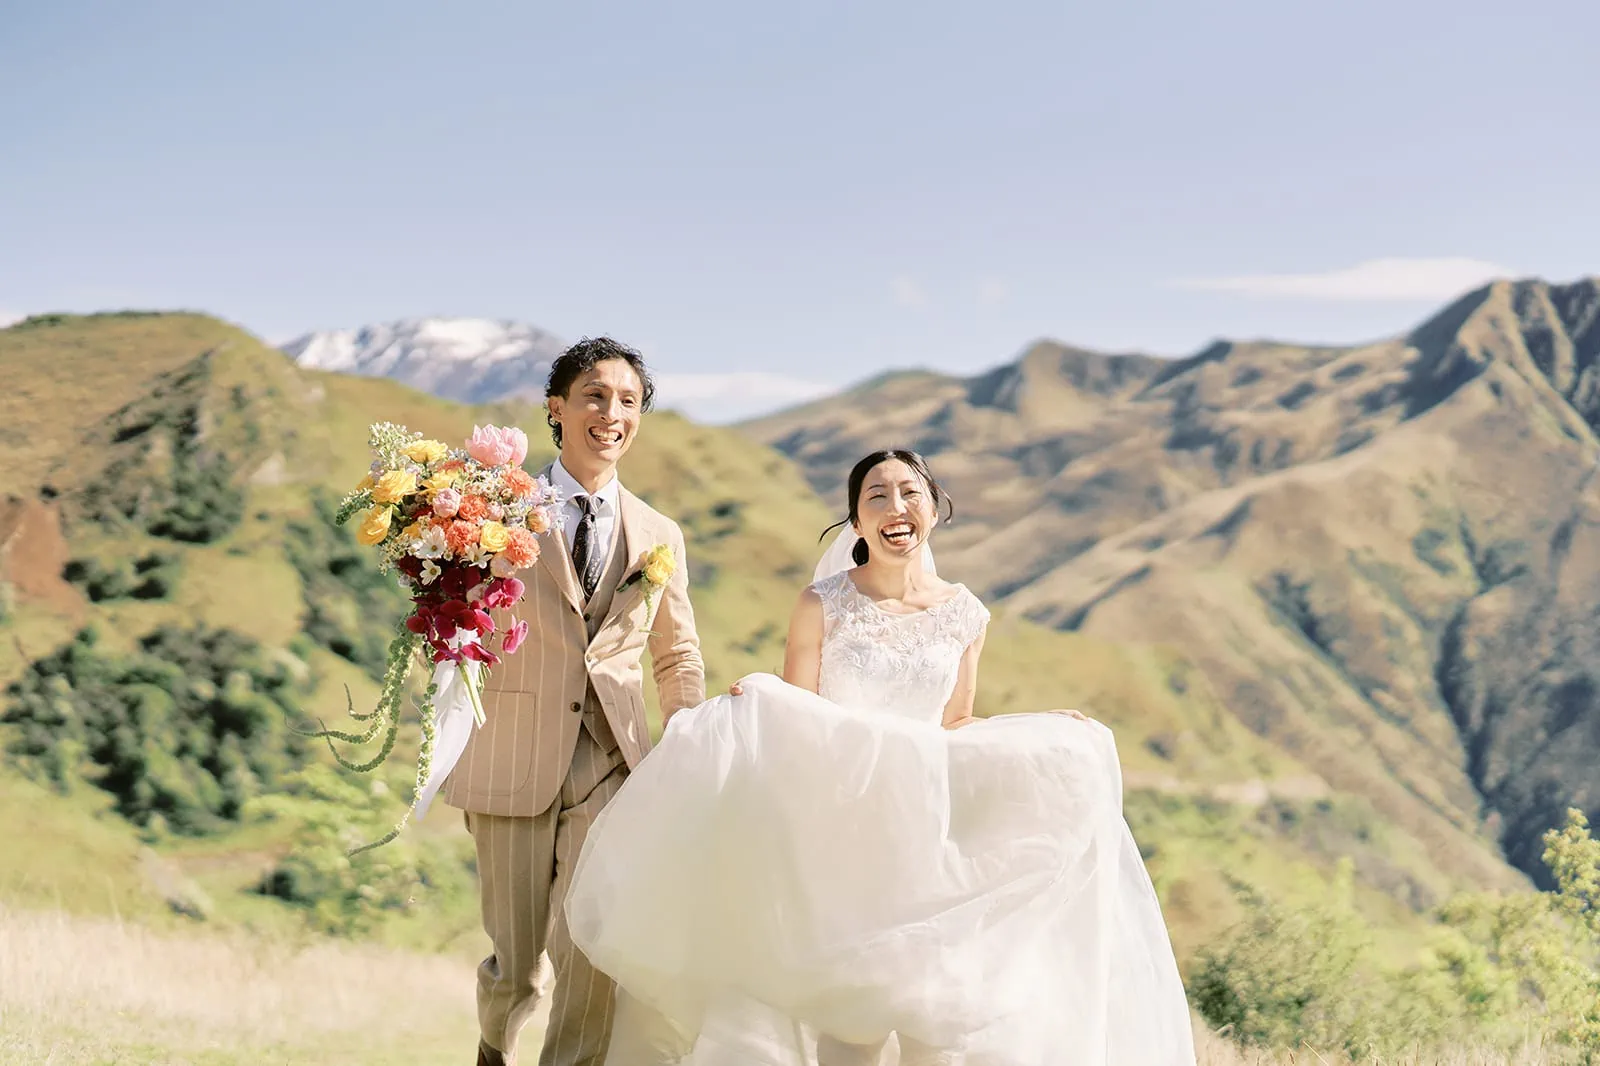 Queenstown Elopement Heli Wedding Photographer クイーンズタウン結婚式 | Taisei and Saki, a bride and groom, walking down a hill with mountains in the background in Queenstown.